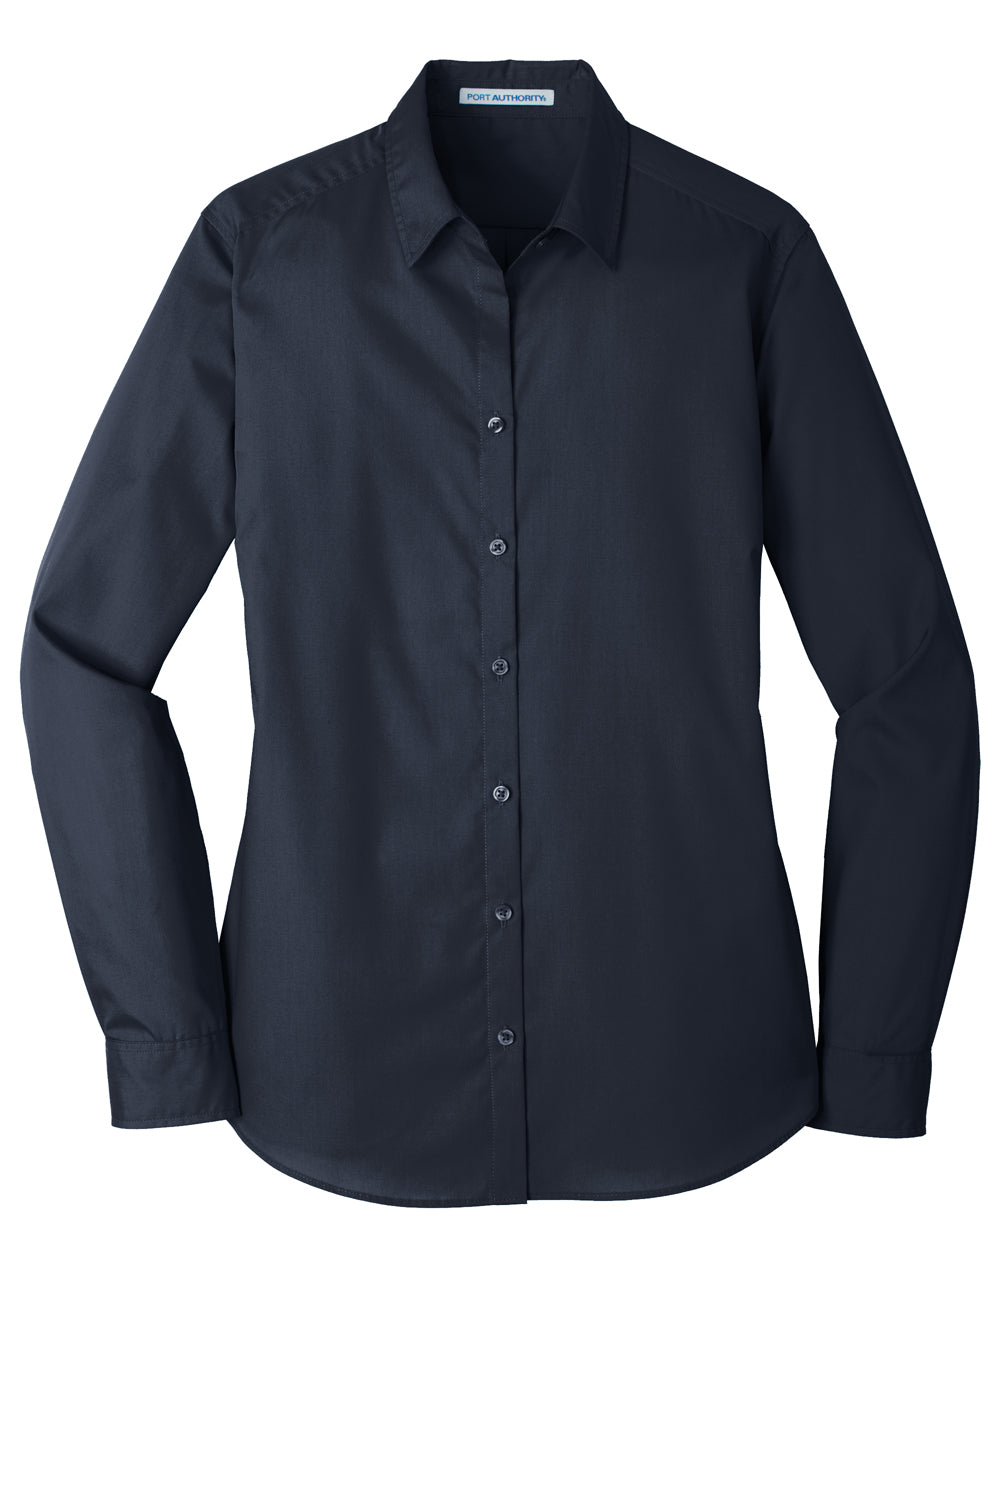 Port Authority LW100 Womens Carefree Stain Resistant Long Sleeve Button Down Shirt River Navy Blue Flat Front